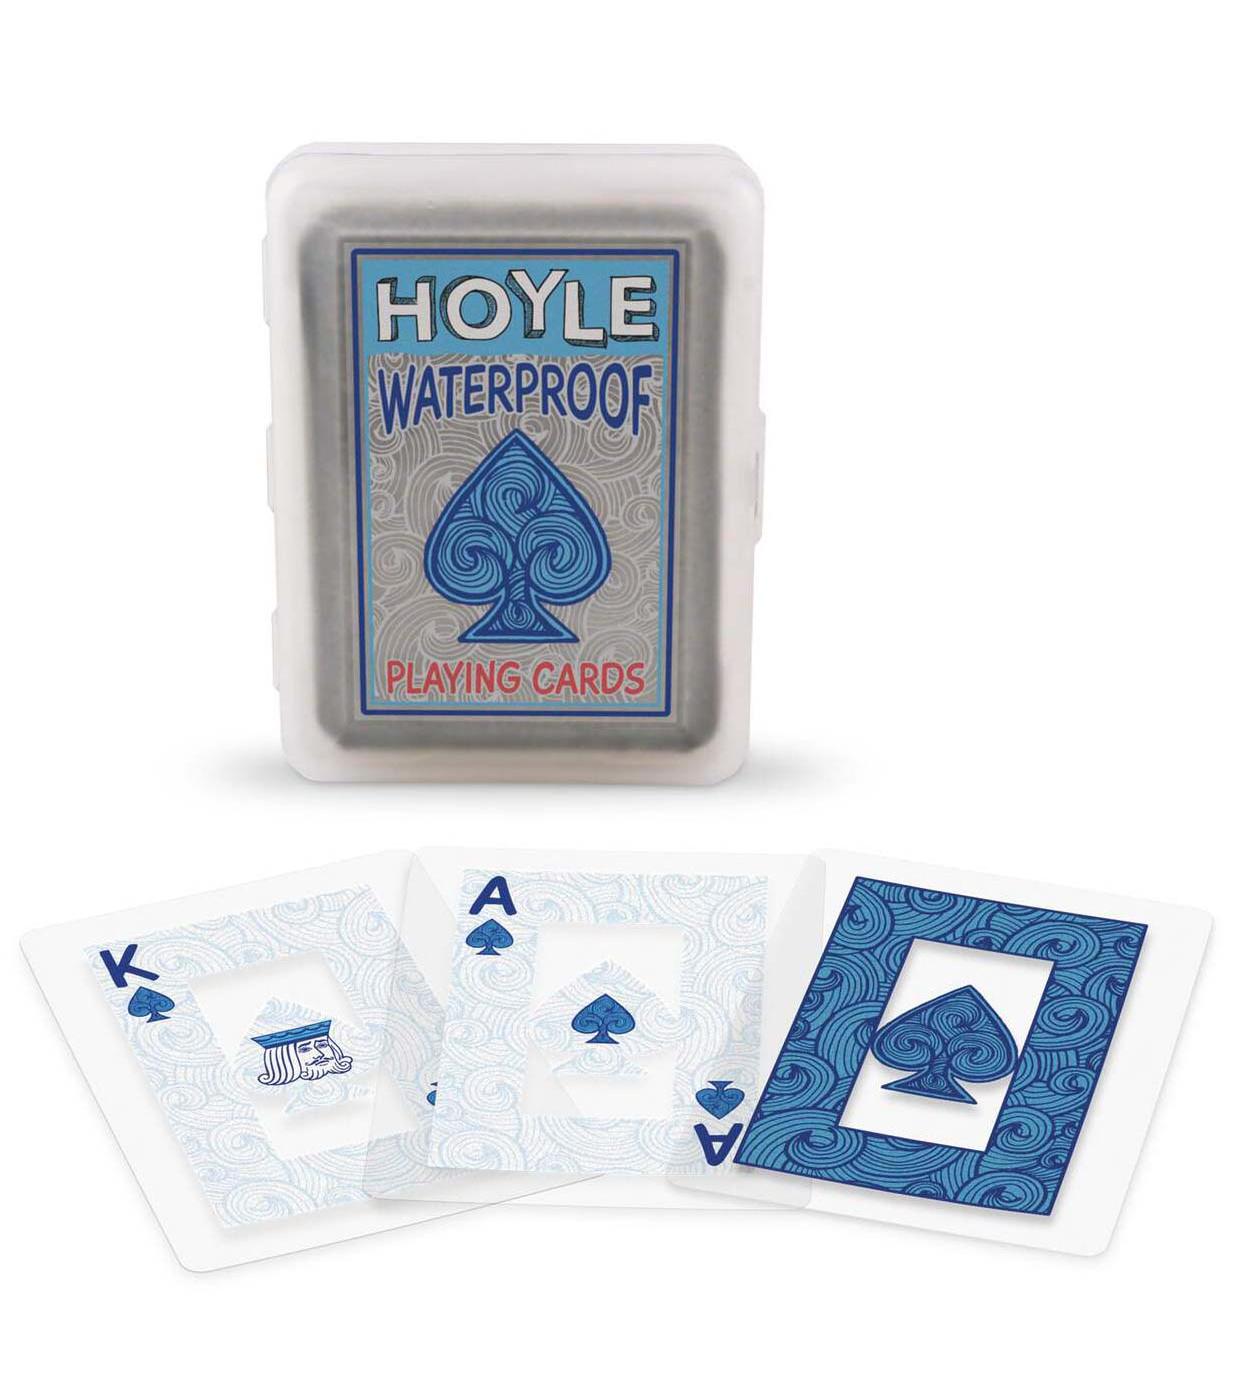 Hoyle Waterproof Clear Playing Cards; image 2 of 2